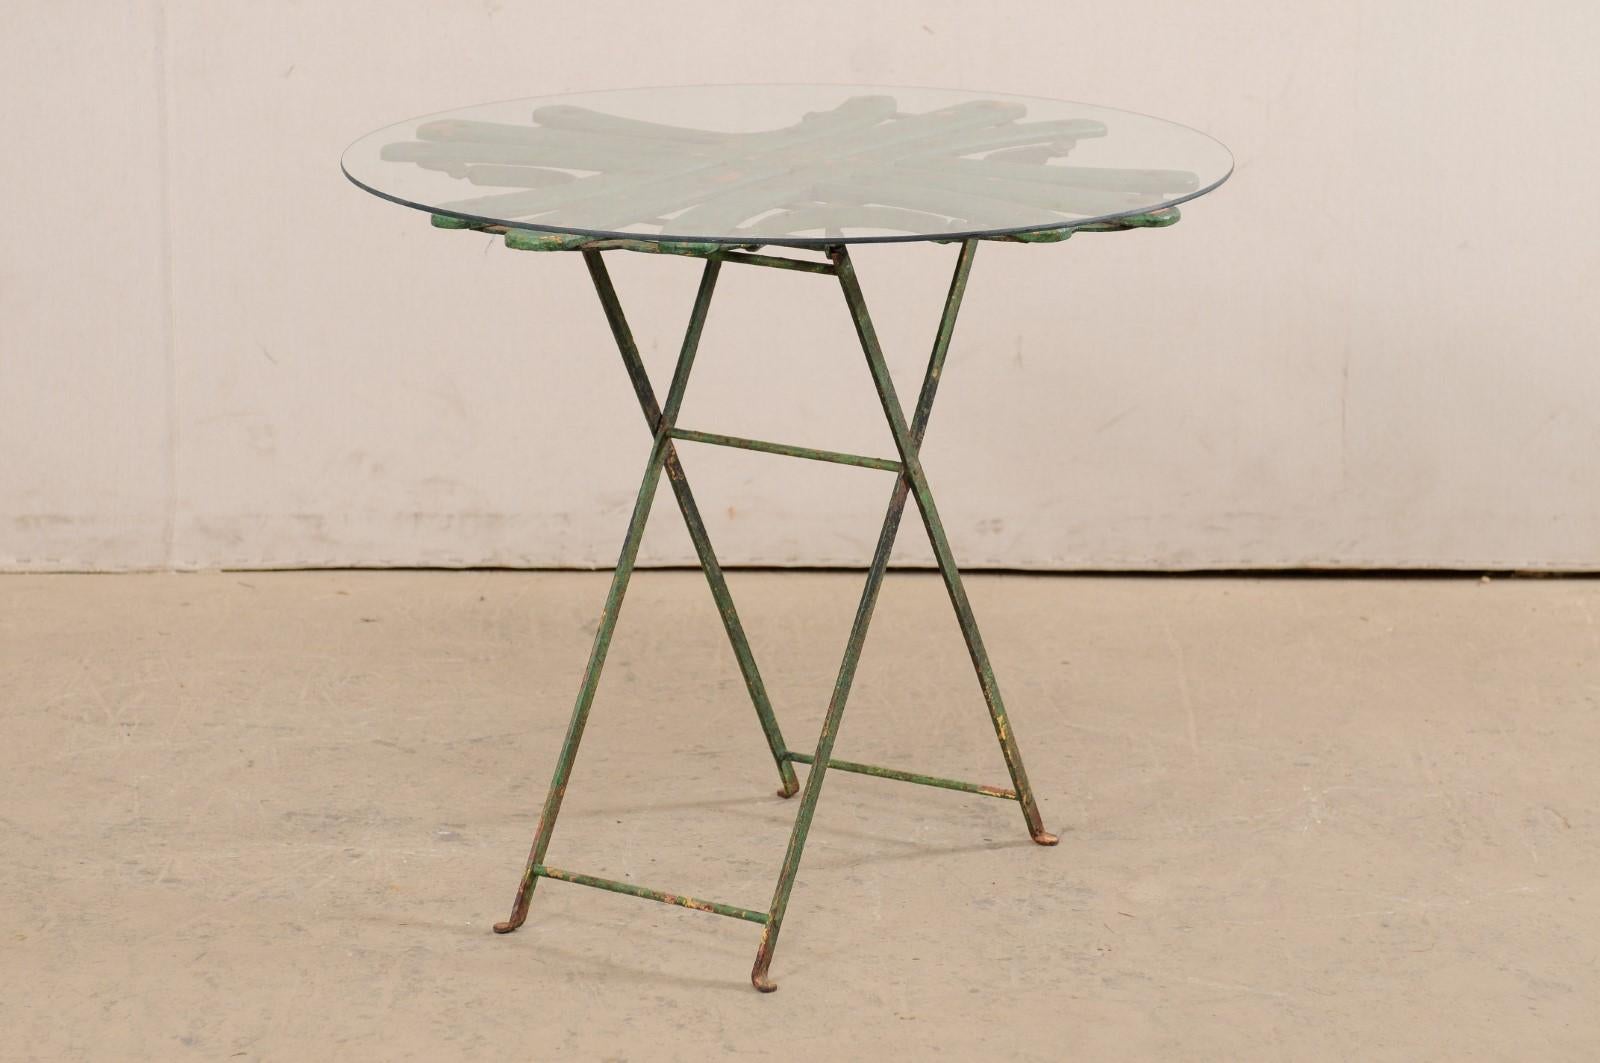 French Bistro Table with Uniquely-Designed Wood Top, Glass over 2